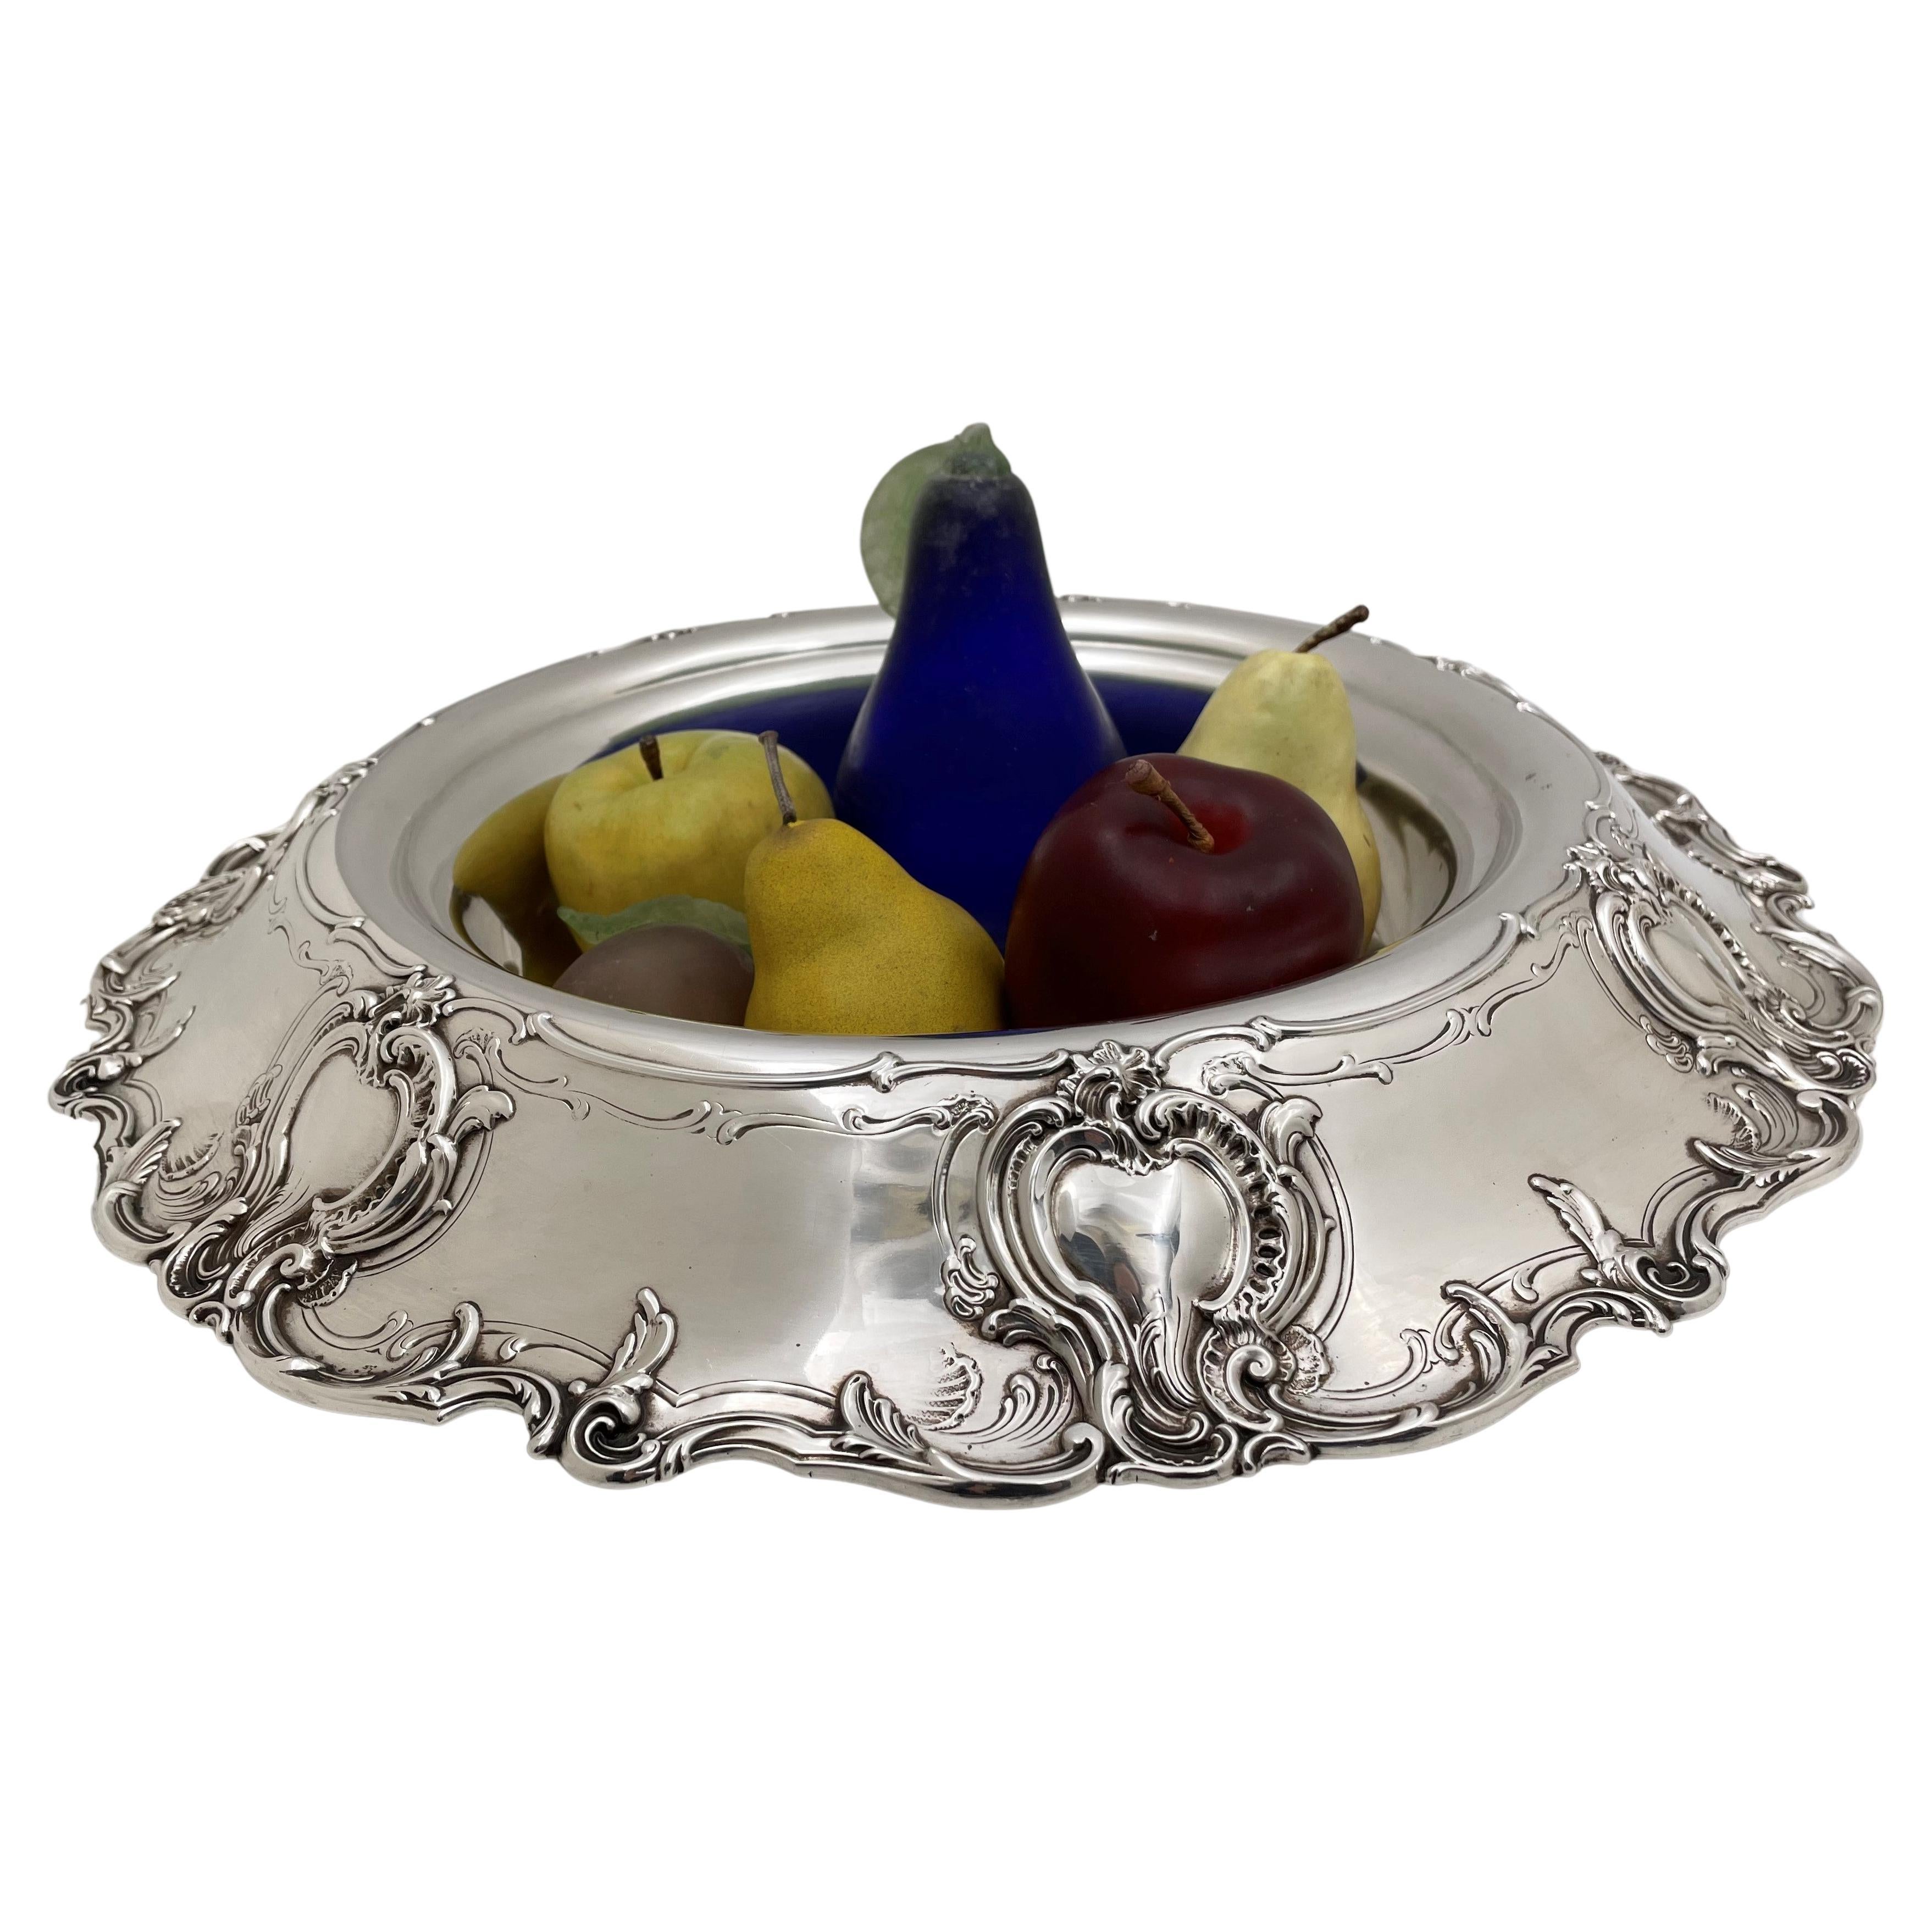 Tiffany & Co Sterling Silver Large 1914 Centerpiece Bowl in Kings Pattern For Sale